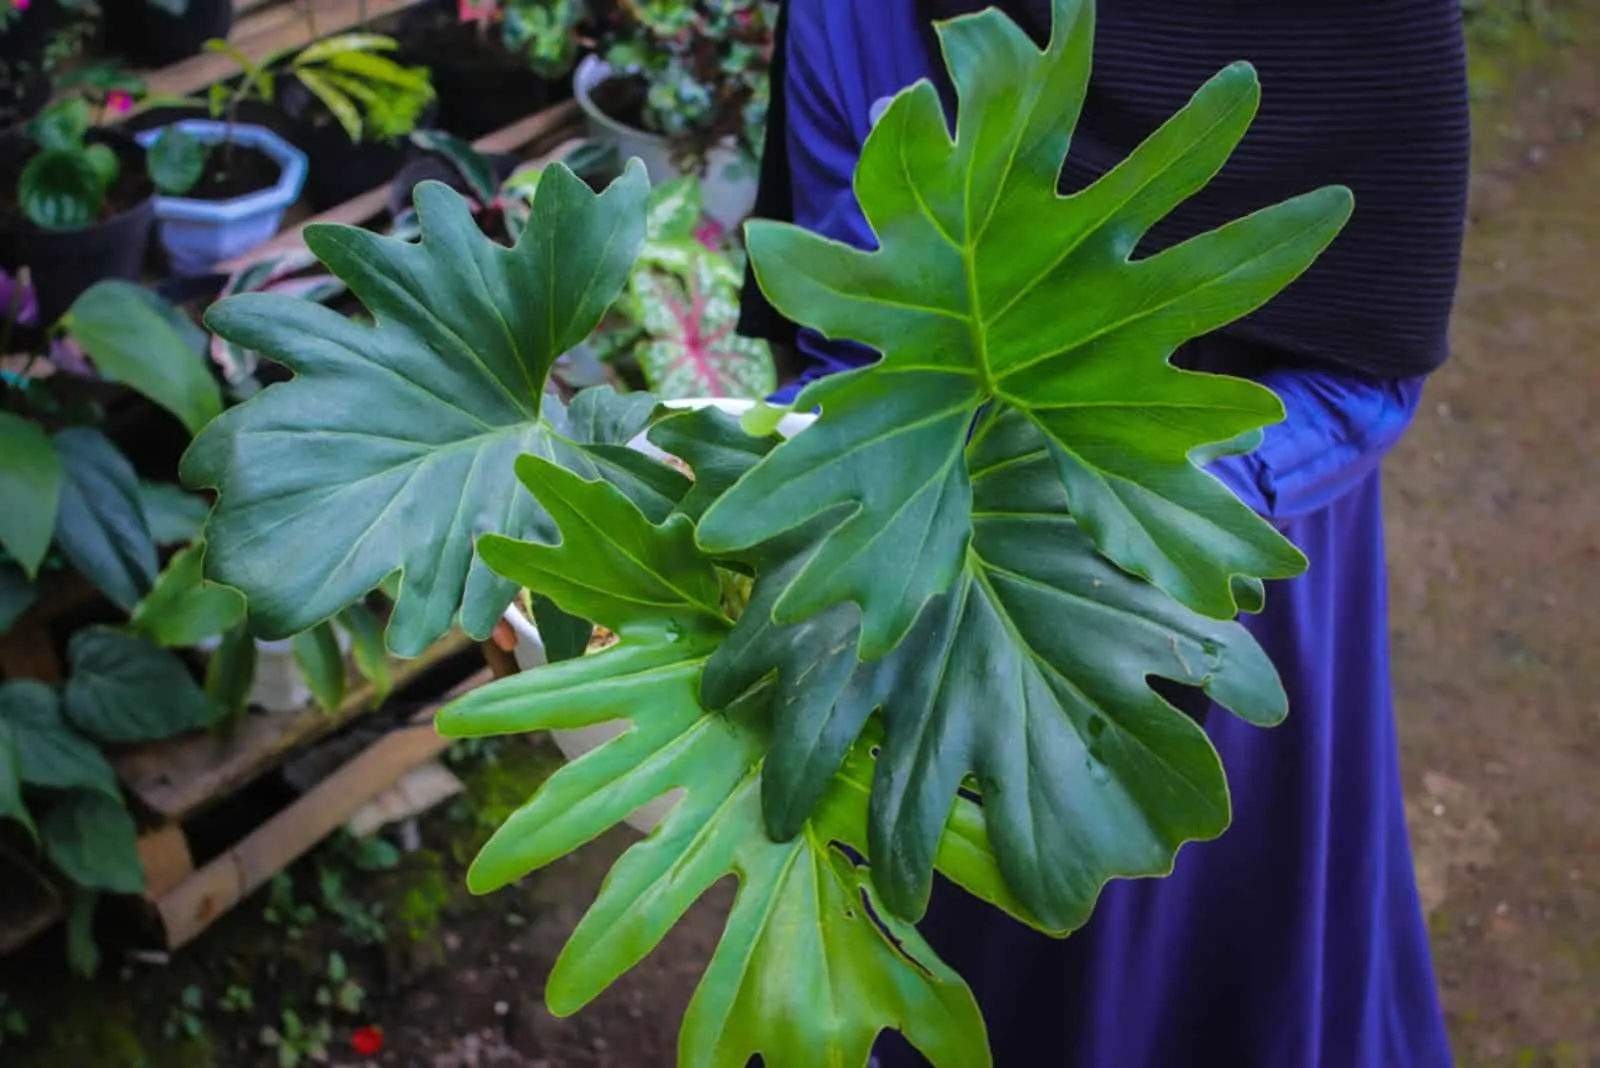 Horsehead Philodendron plant in hands of gardener